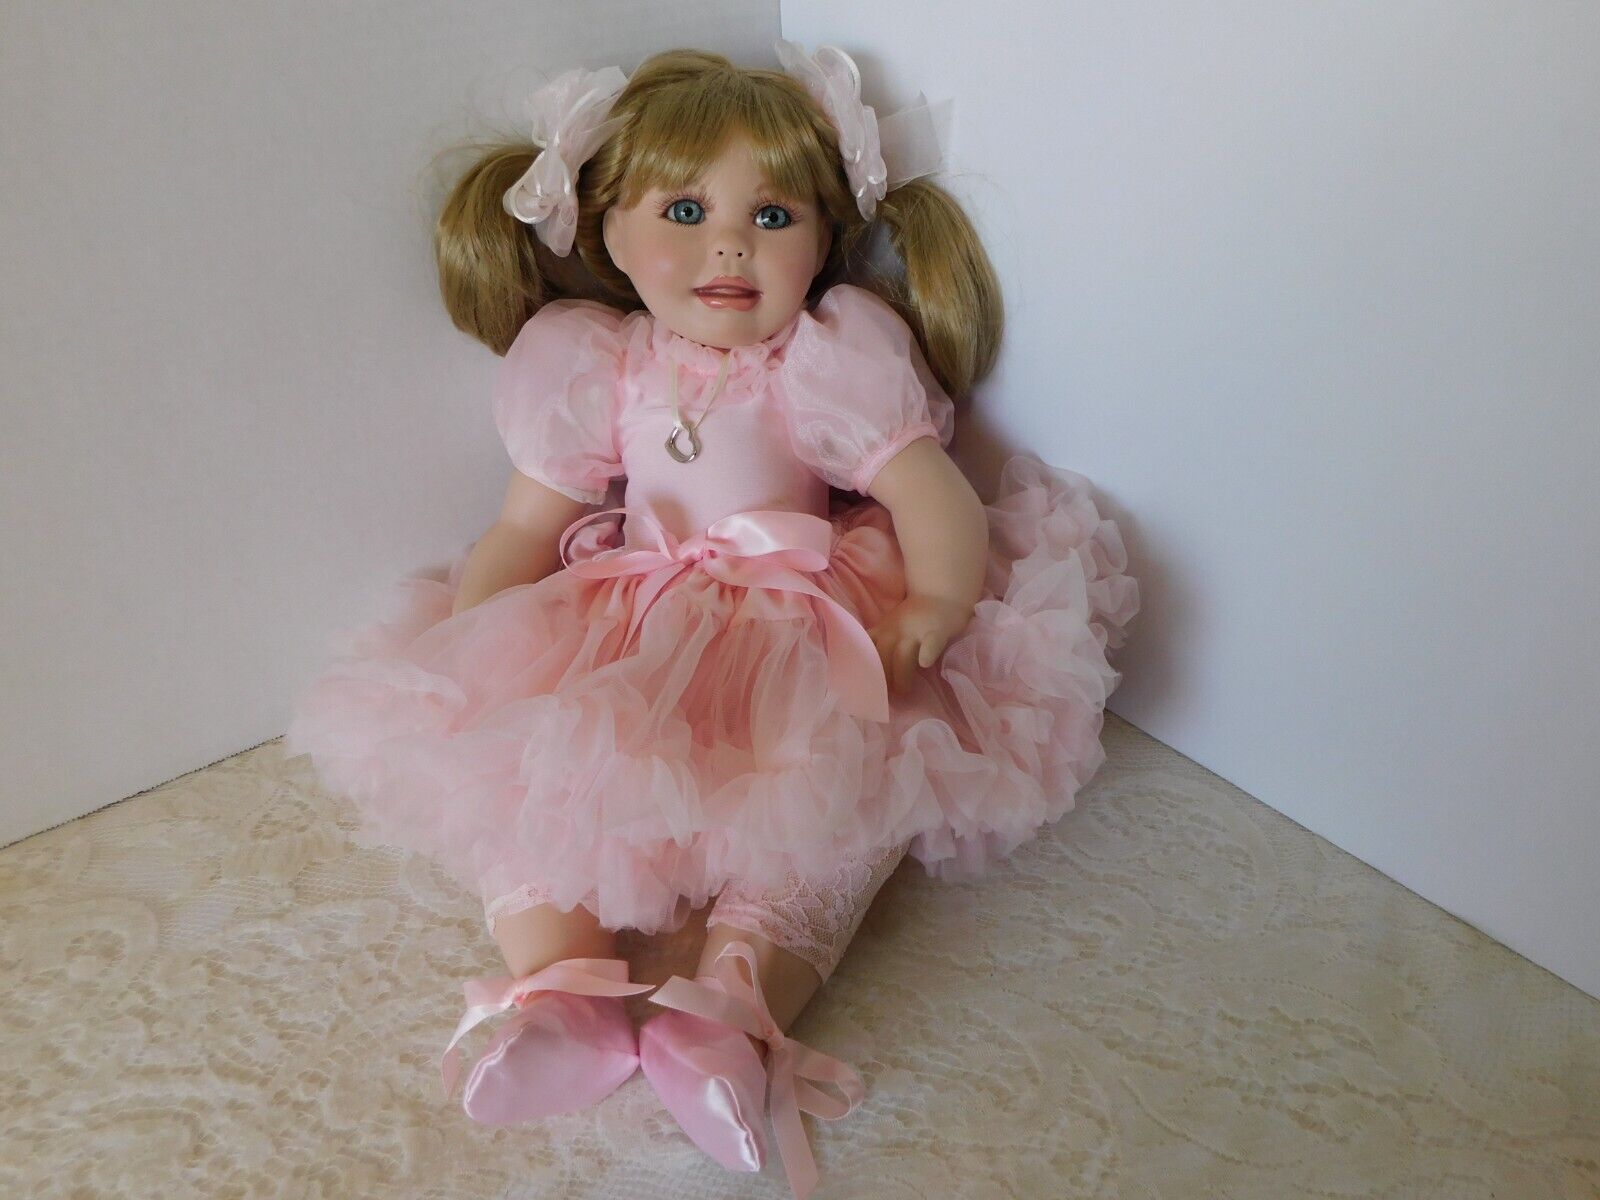 EXQUISITE MARIE OSMOND BALLERINA # 0024 IN PINK TUTU + BALLET SHOES - SIGNED